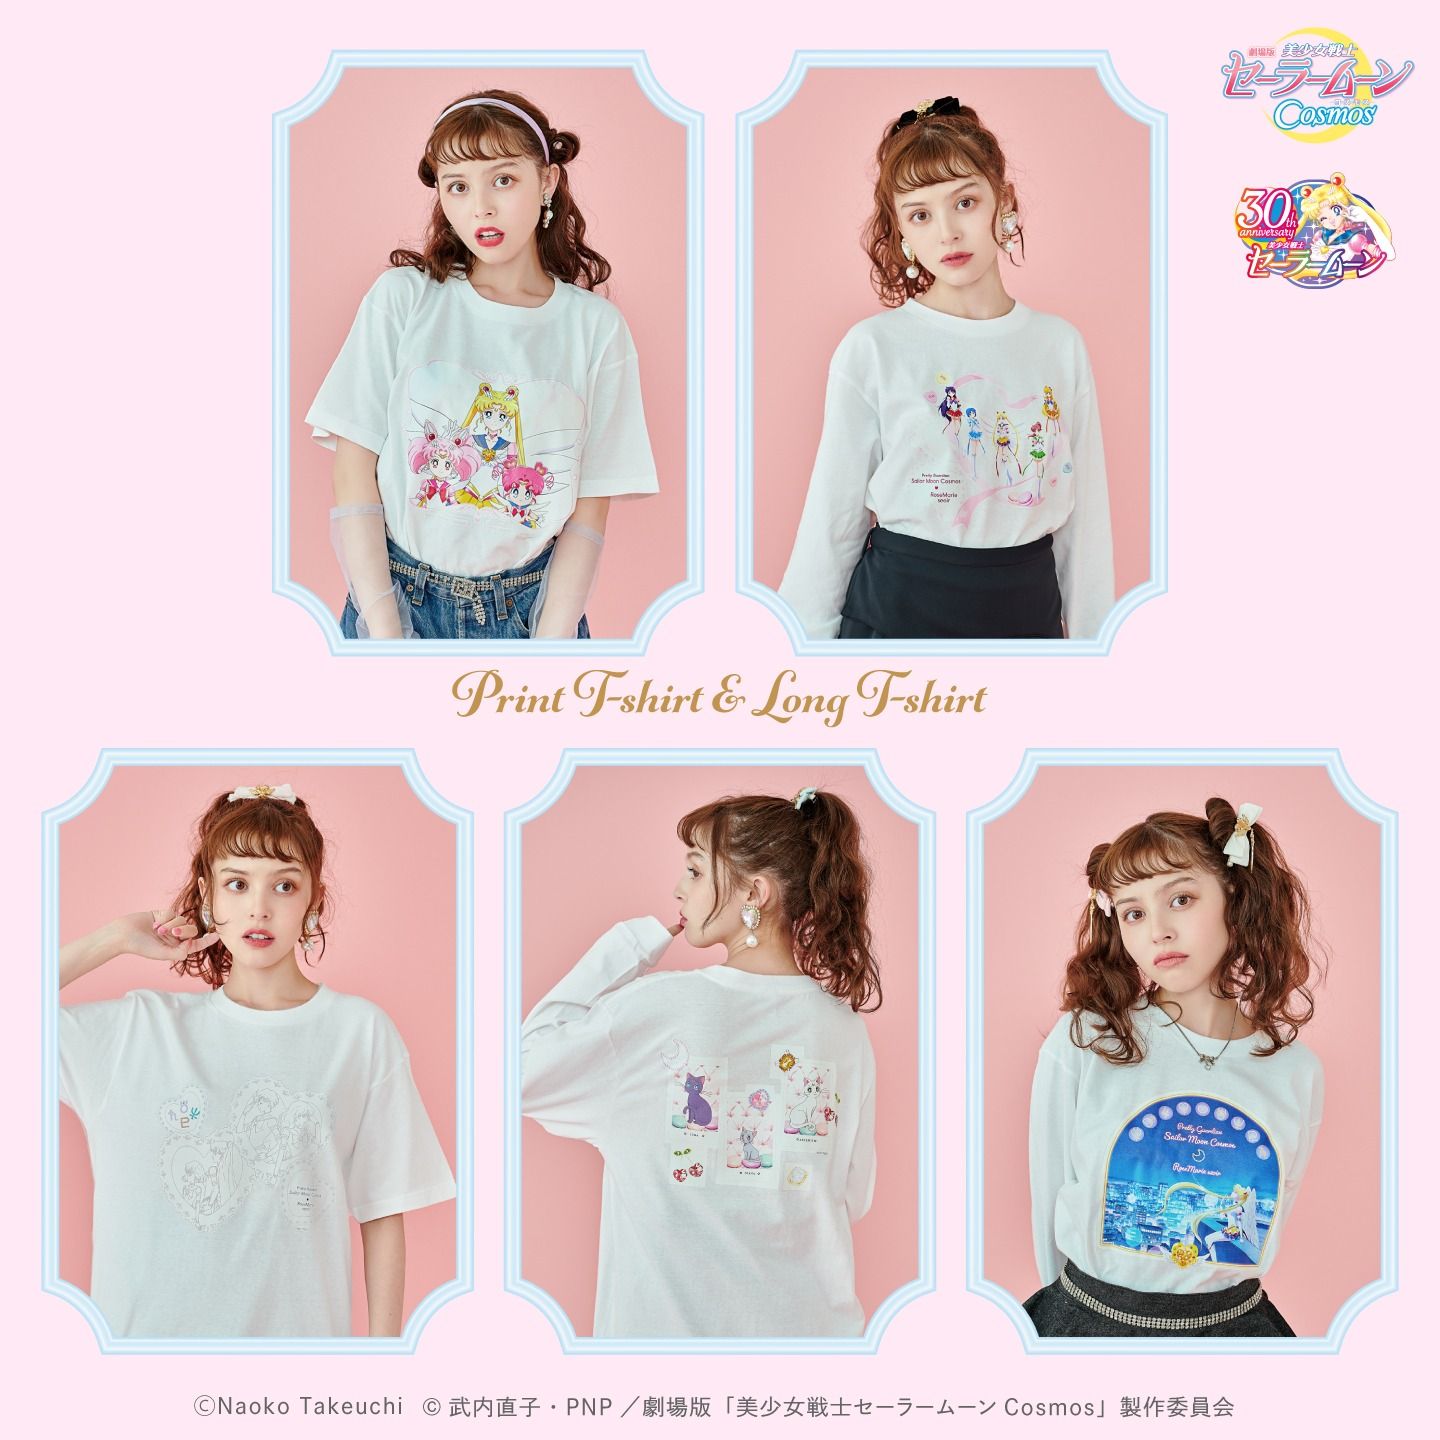 Sailor Moon Releases Brand-New Fashion Collection in Official Collaboration